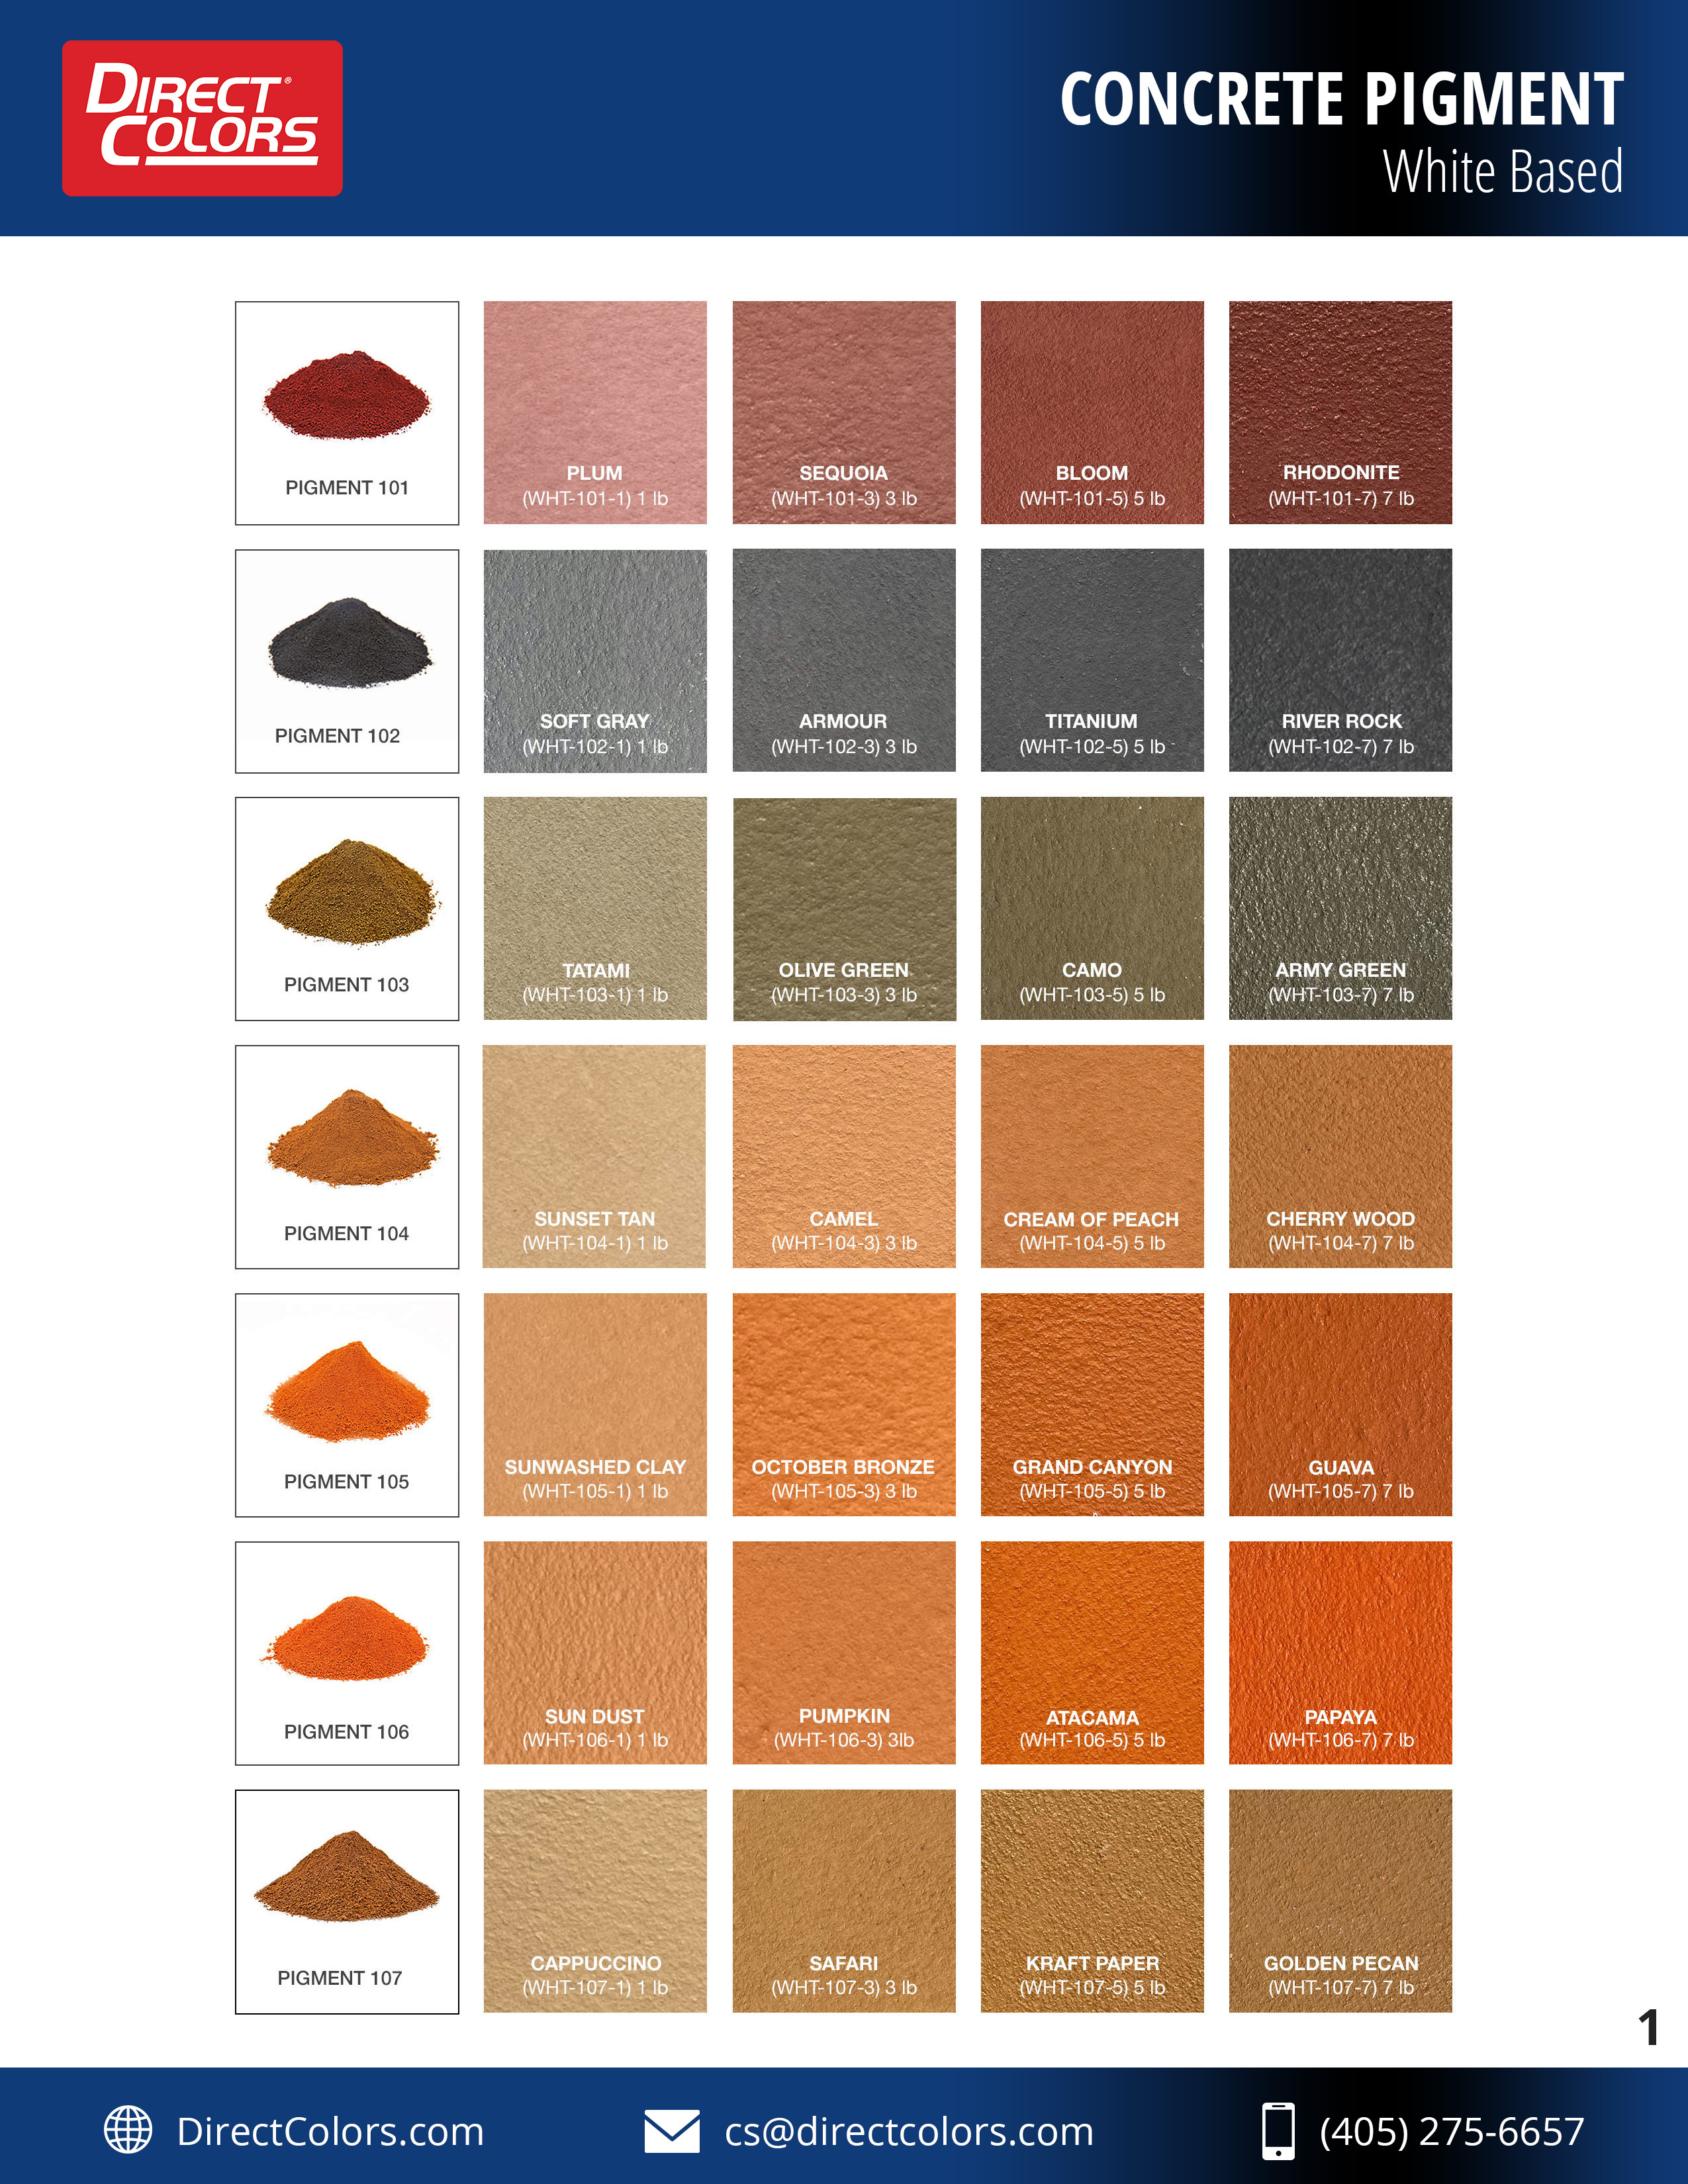 WHITE-BASED PIGMENTS - COLOR CHART